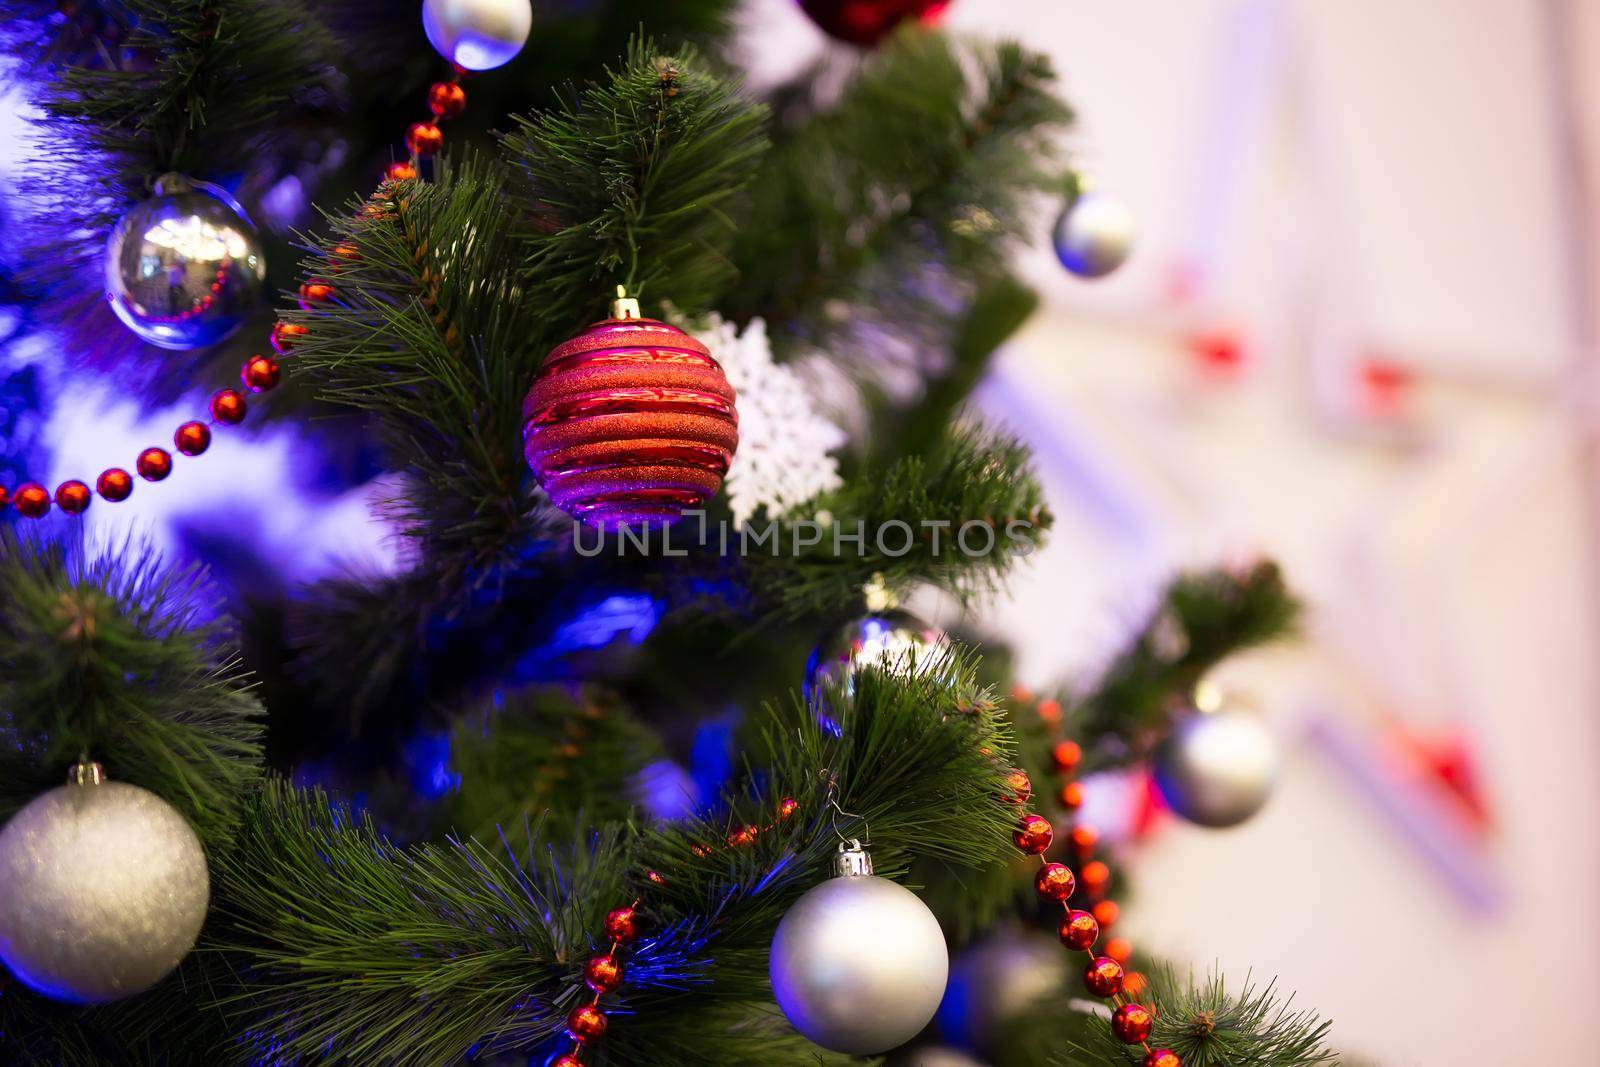 Decorated Christmas trees in close-up. Red and gold balls and illuminated garlands with flashlights.